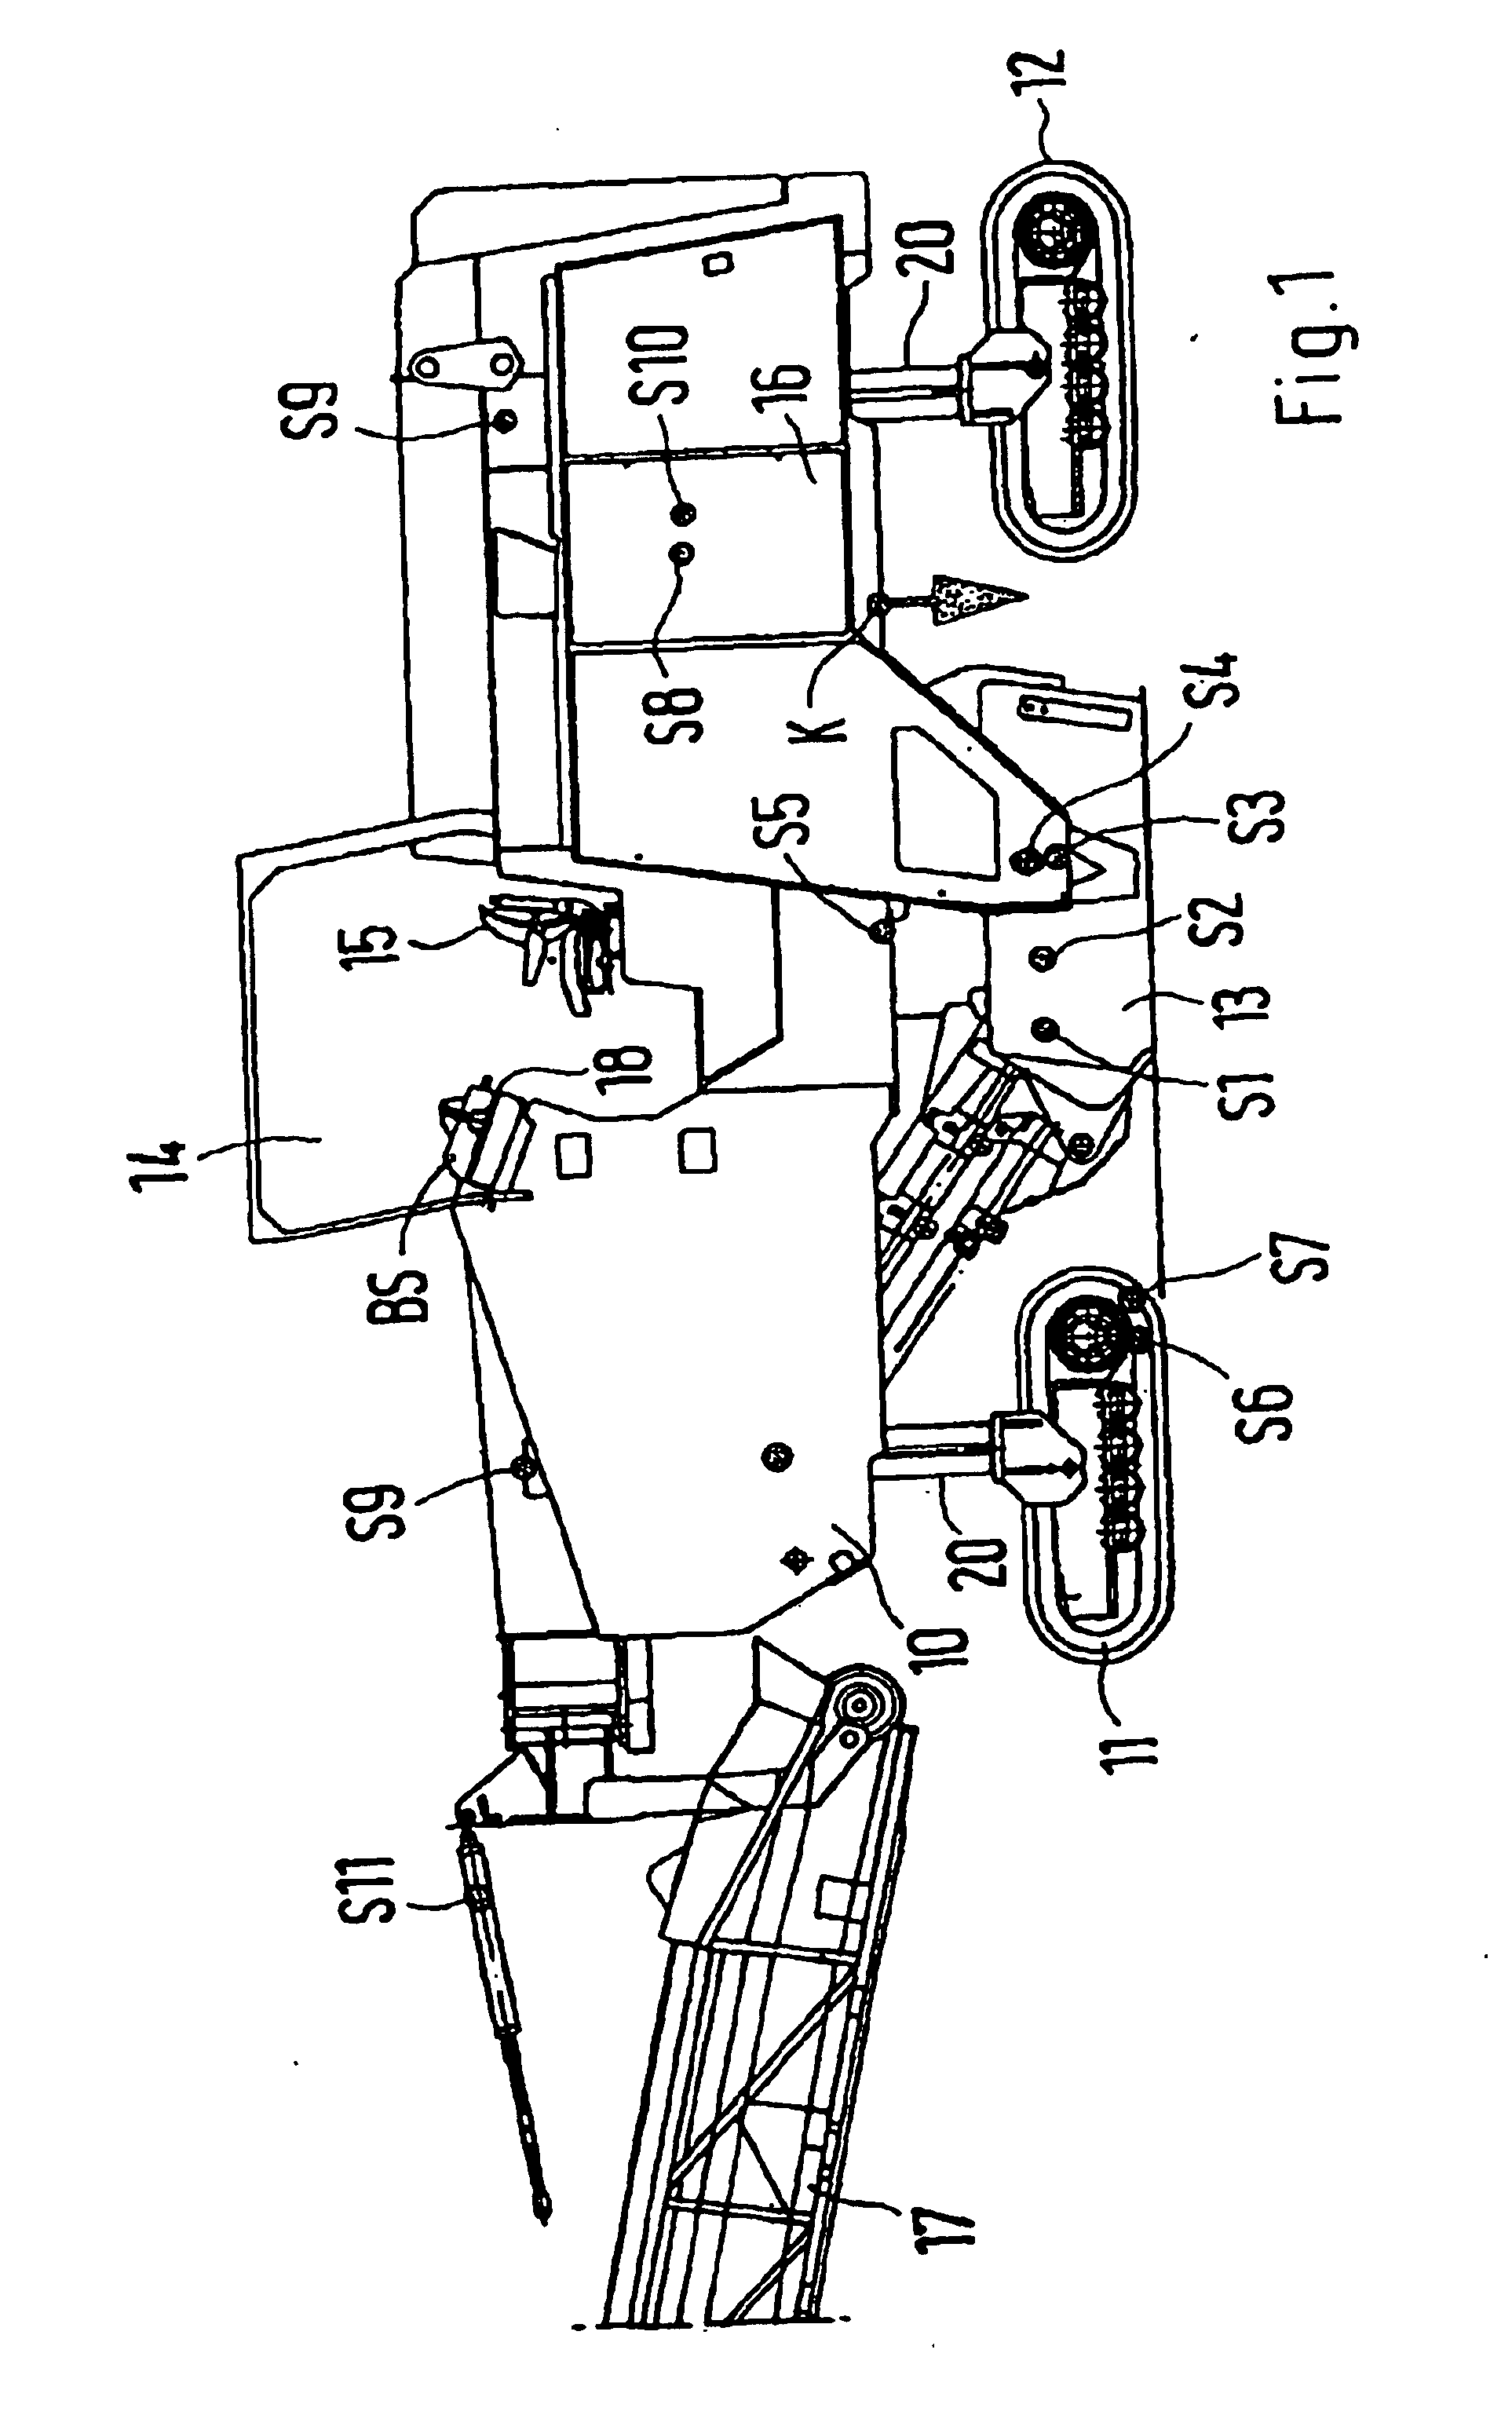 Road milling machine with optimized operation